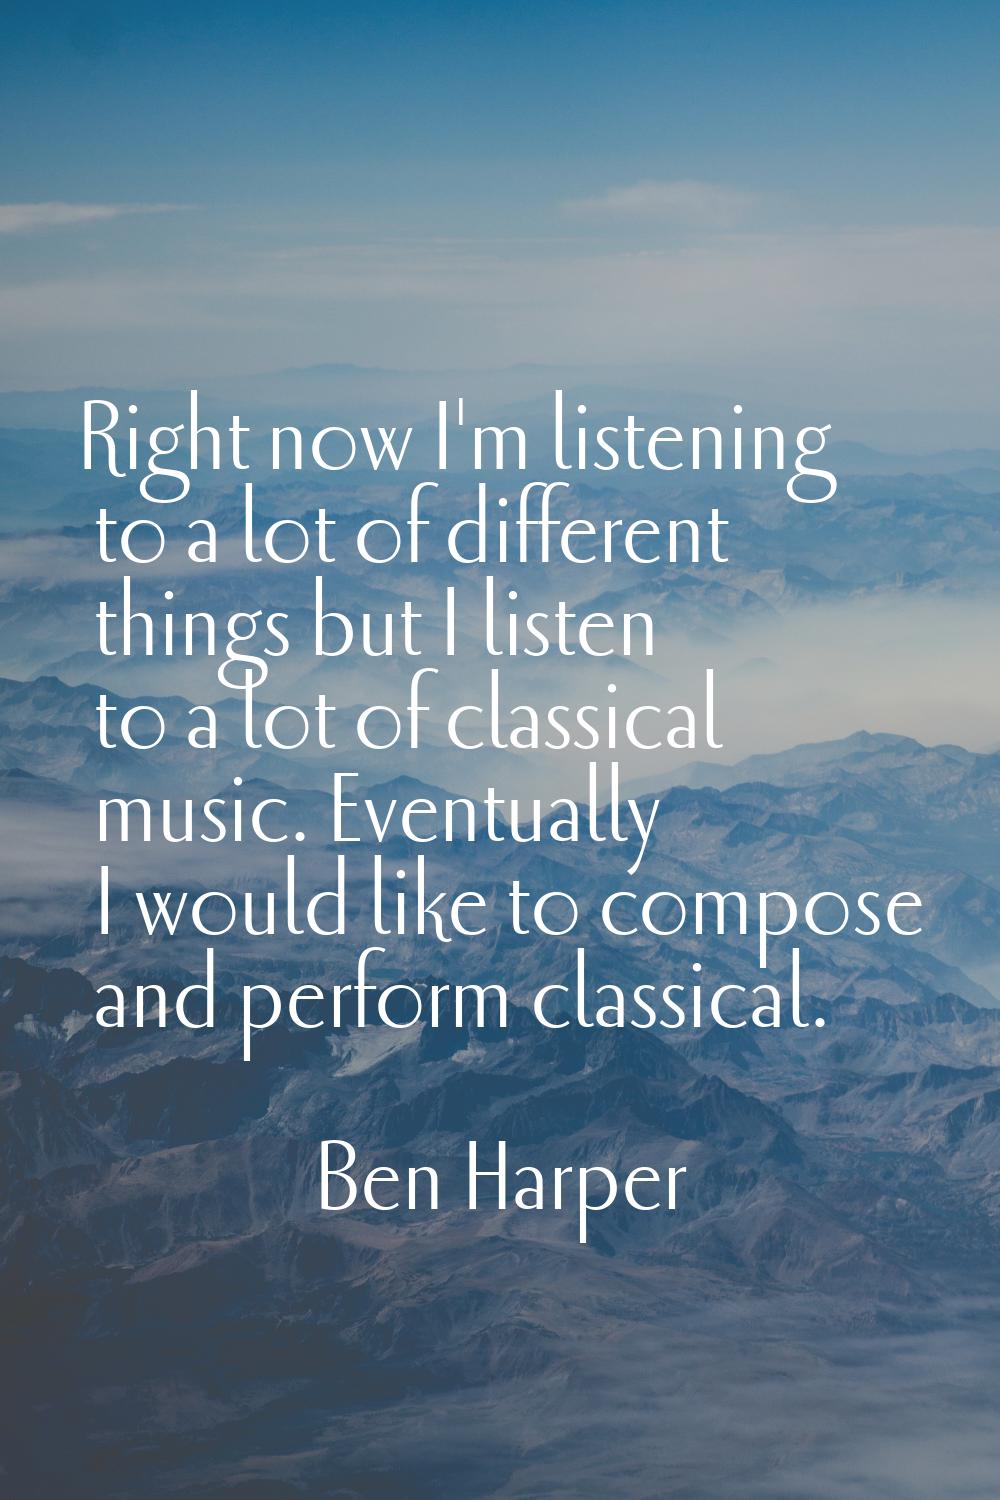 Right now I'm listening to a lot of different things but I listen to a lot of classical music. Even